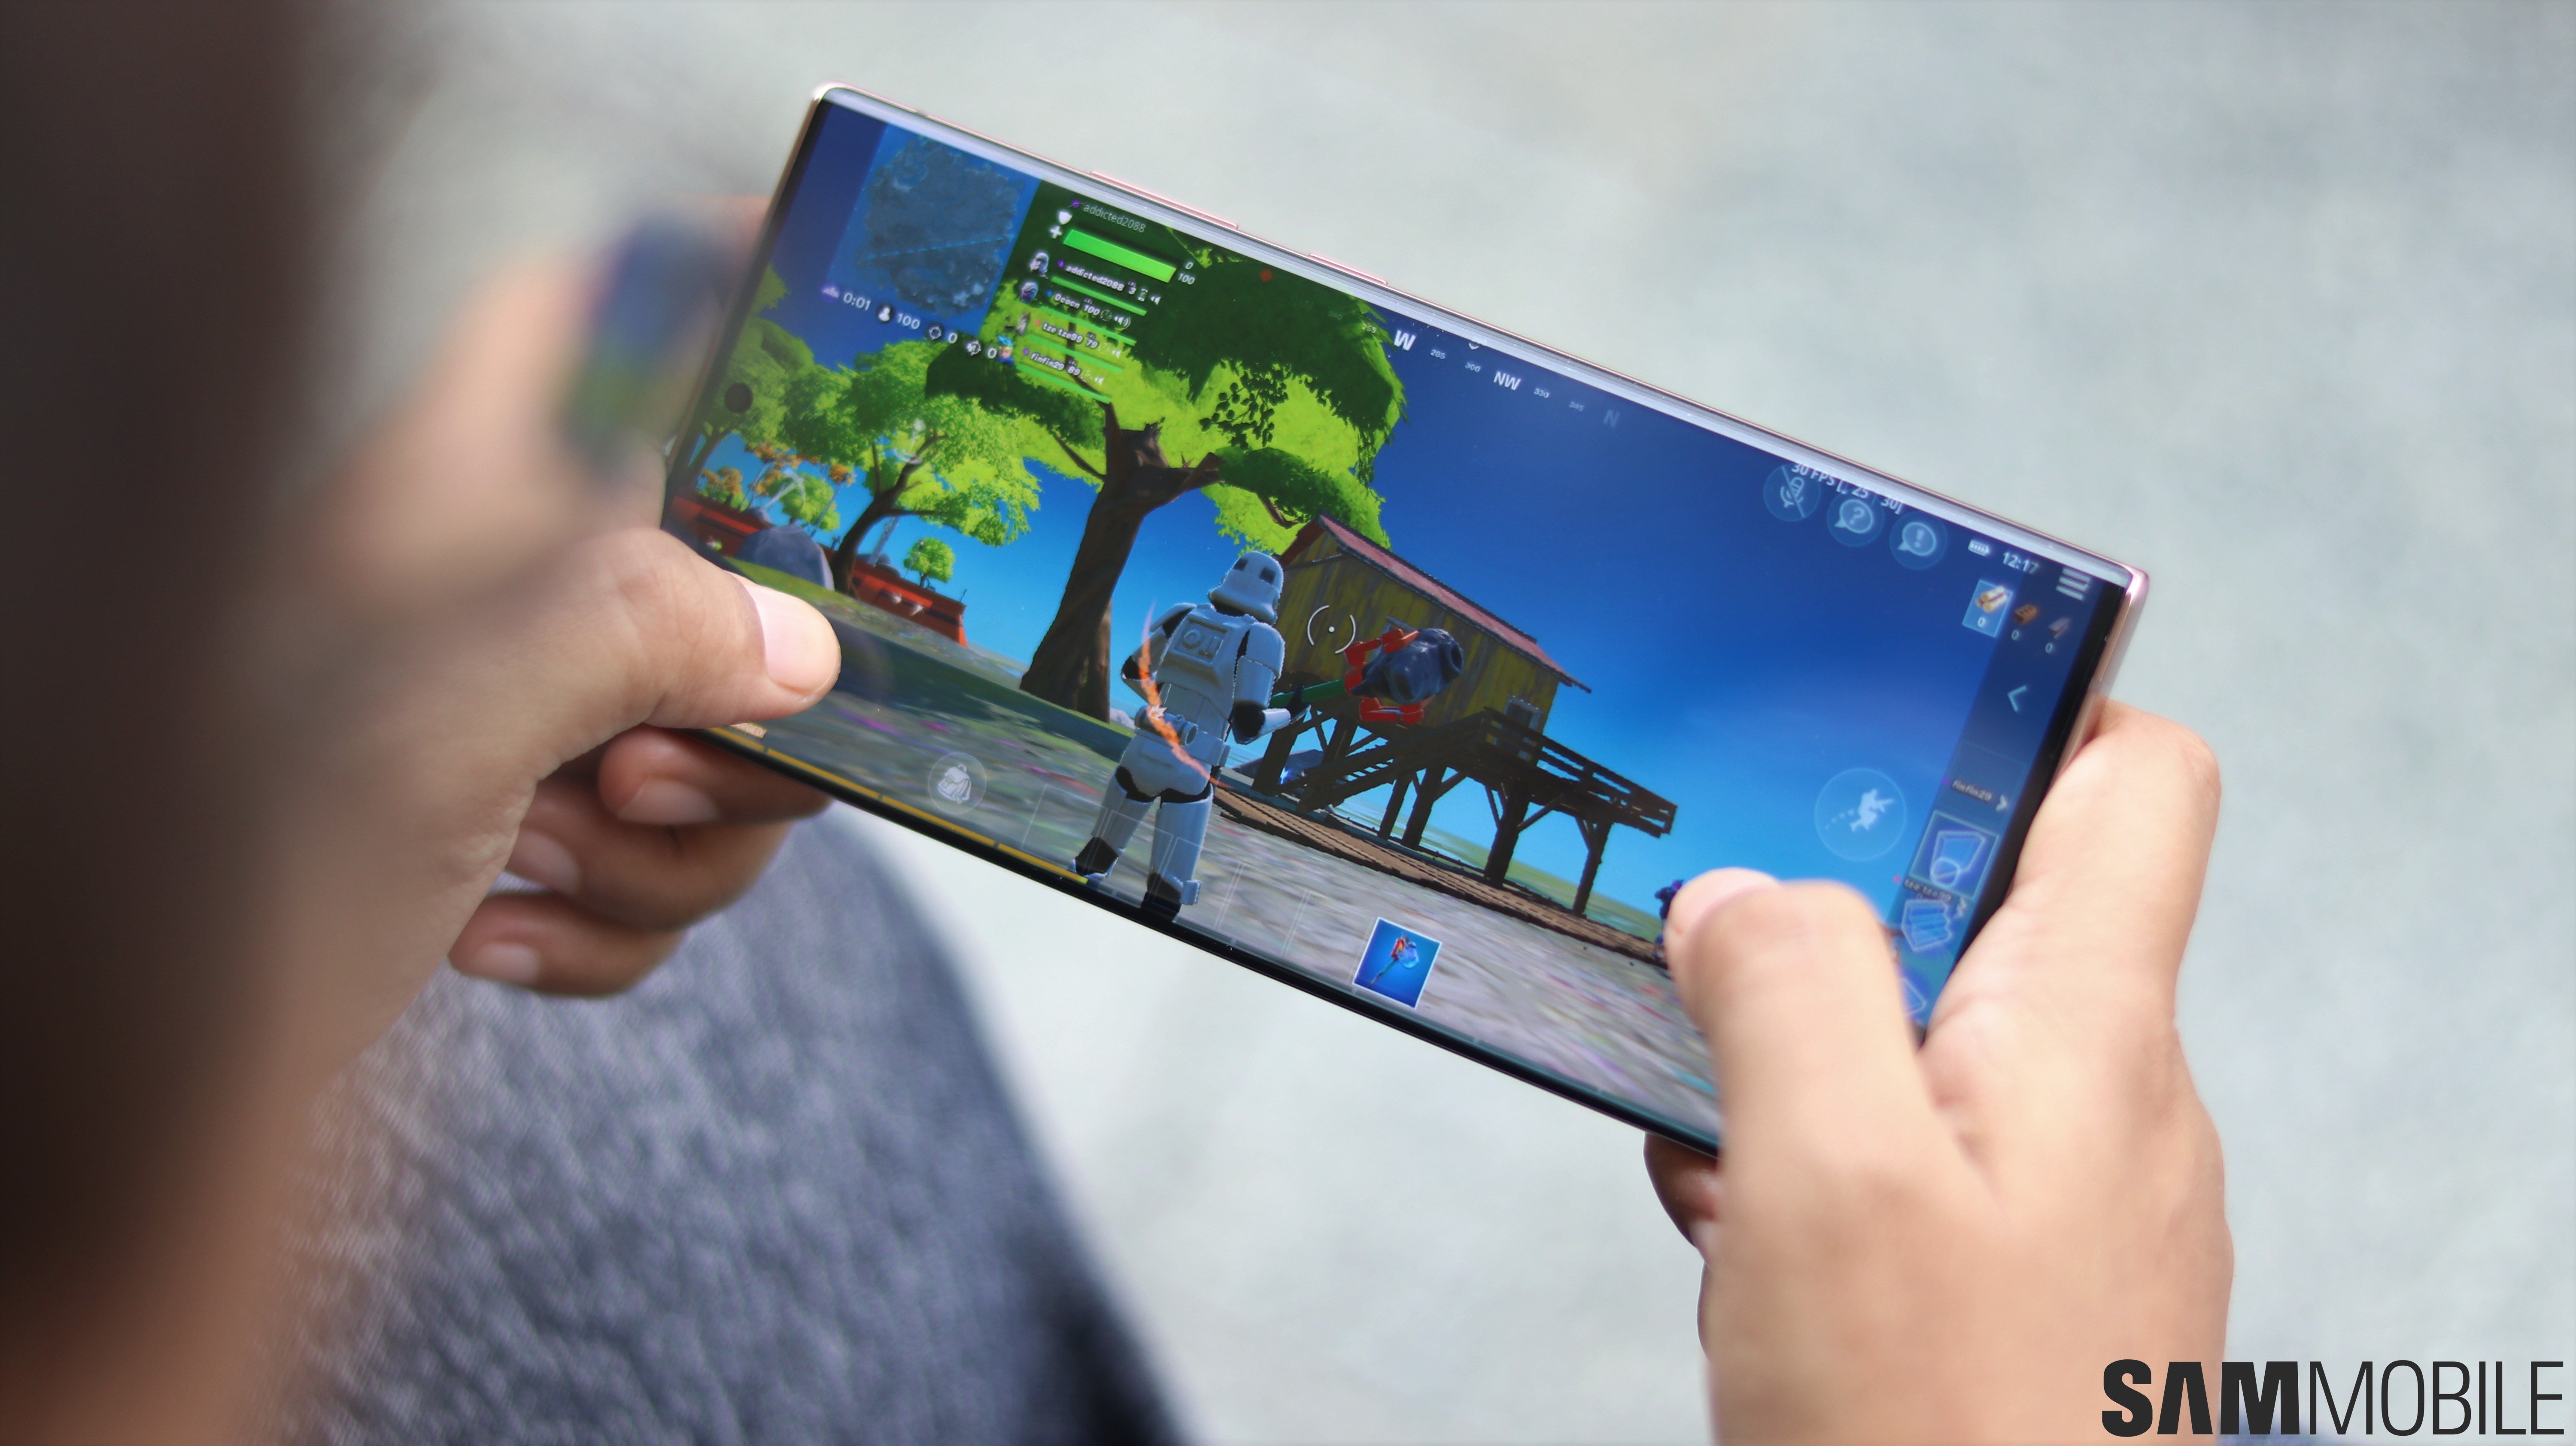 Fortnite Android APK Download Released For Samsung Galaxy Devices